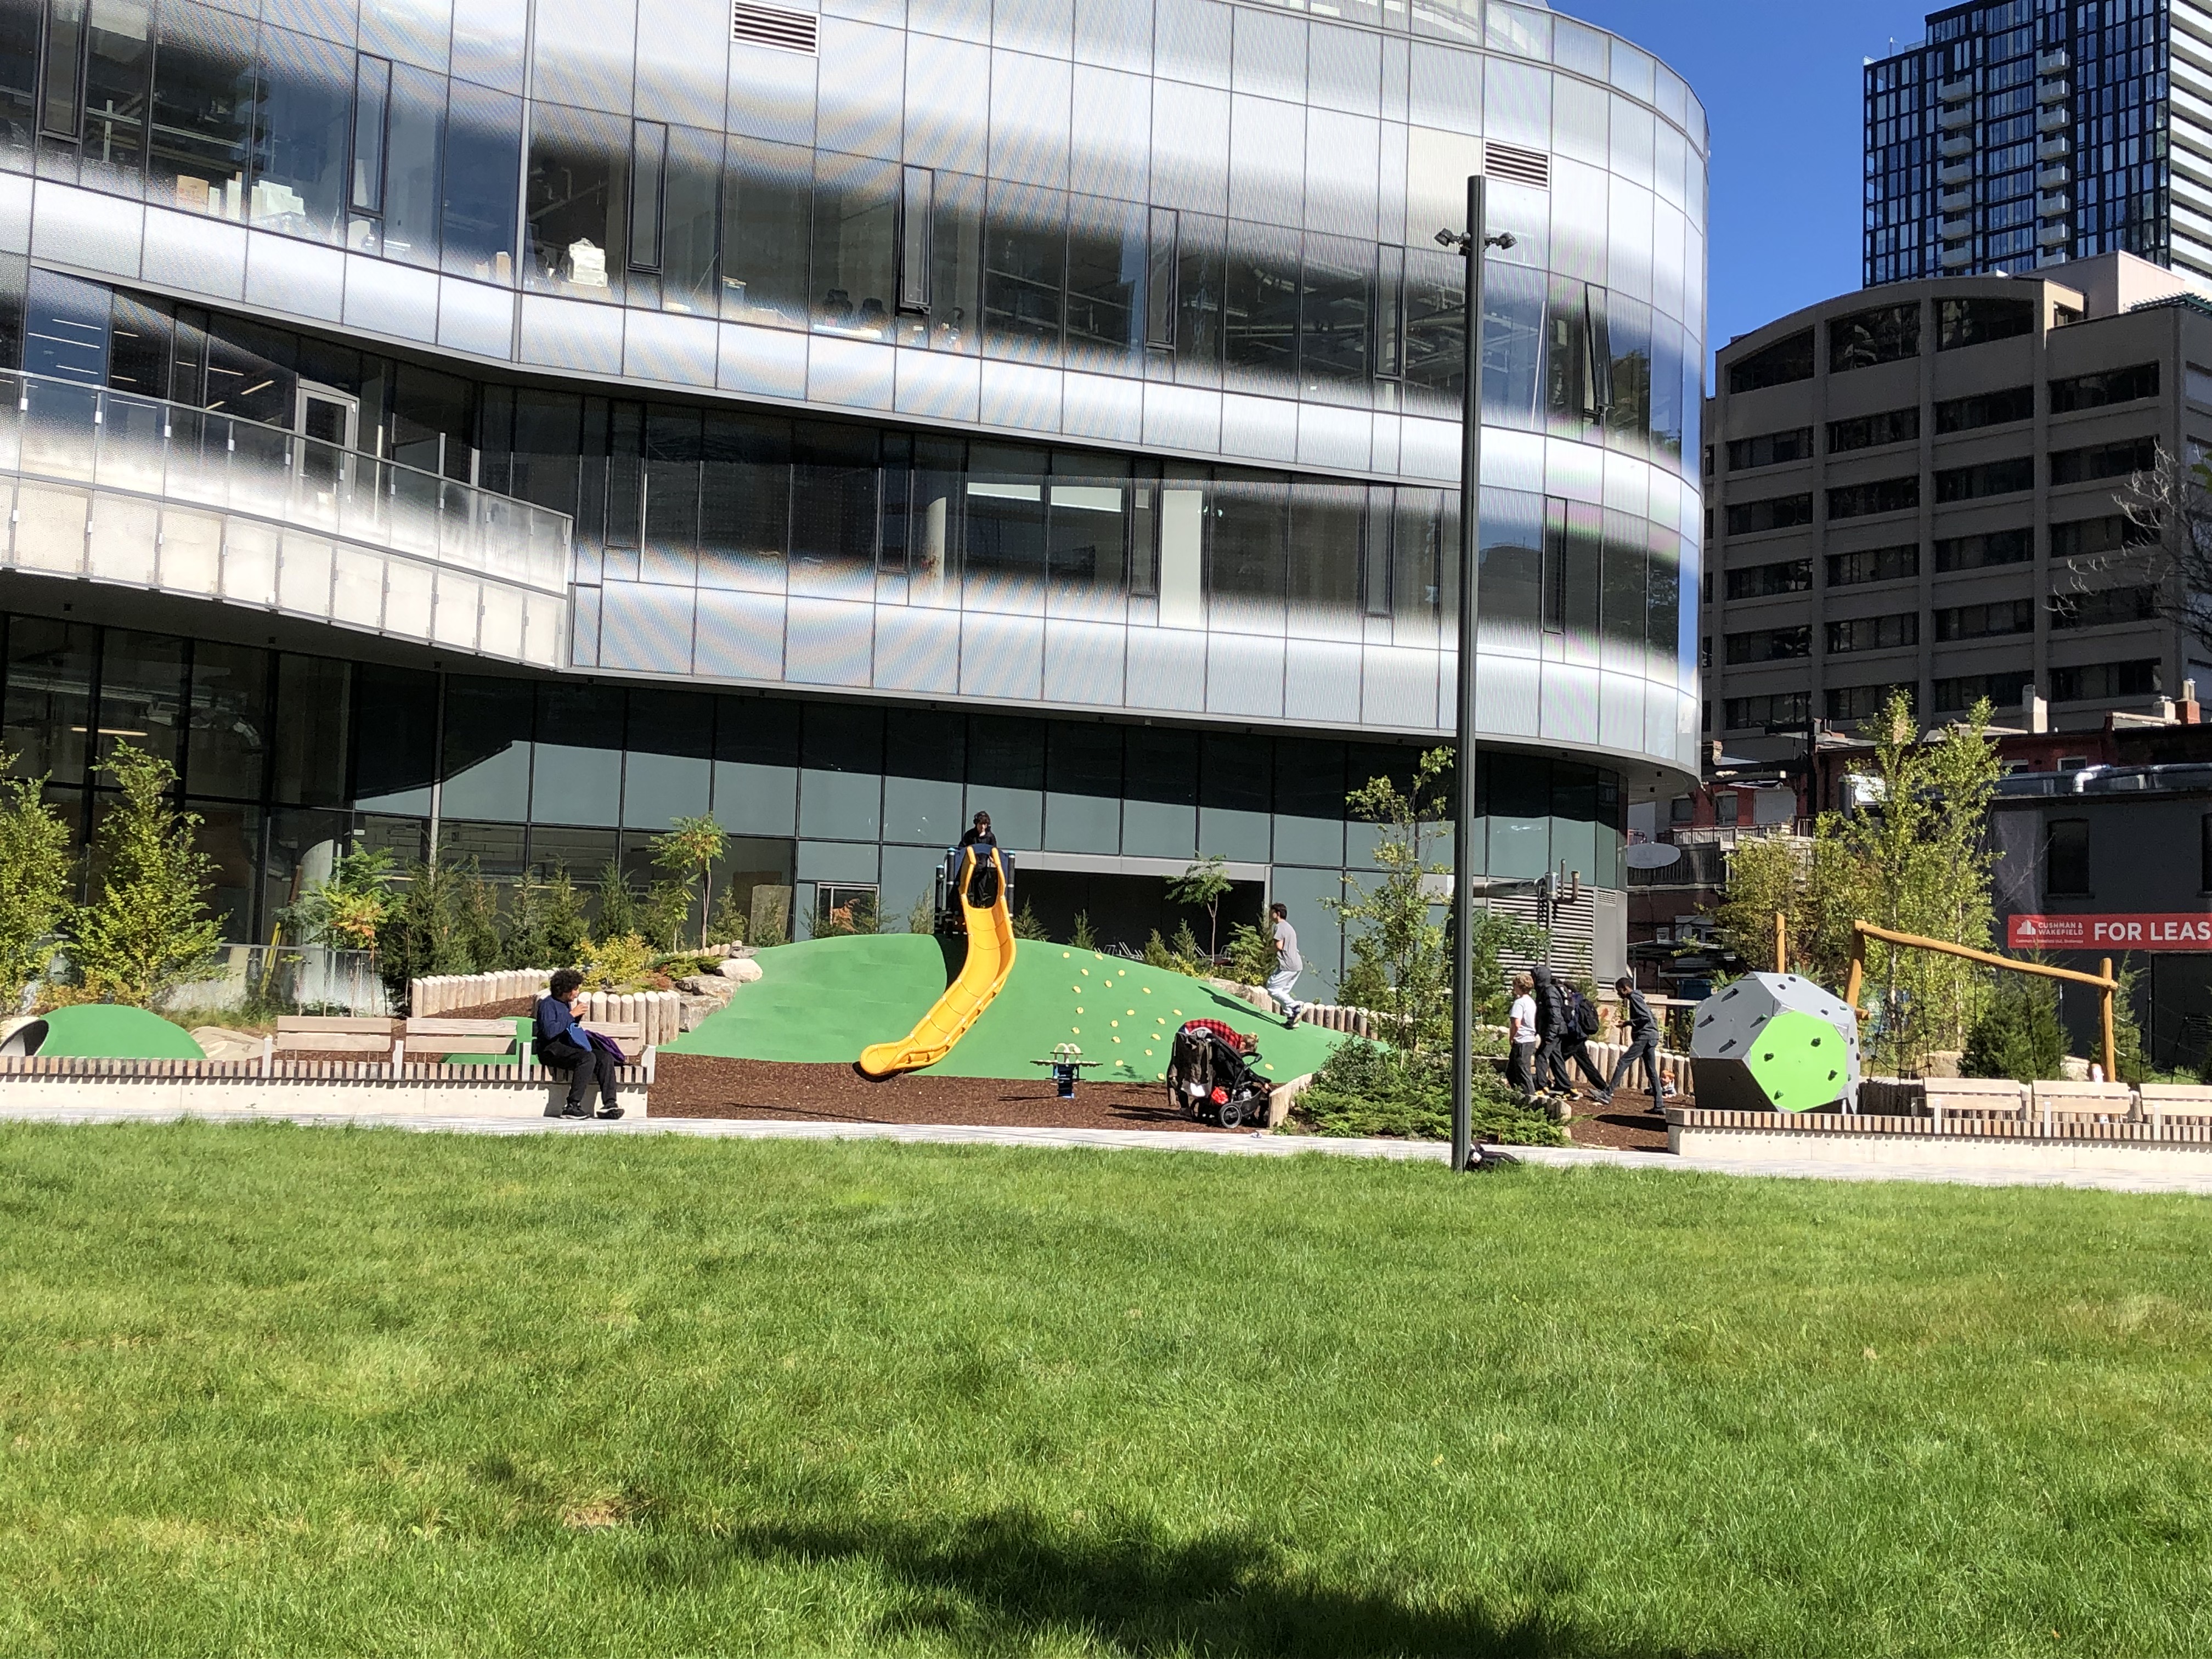 A photograph of Dr. Lillian McGregor Park which shows the playground and children playing on a yellow slide and climbing features. An open lawn area is in the foreground.